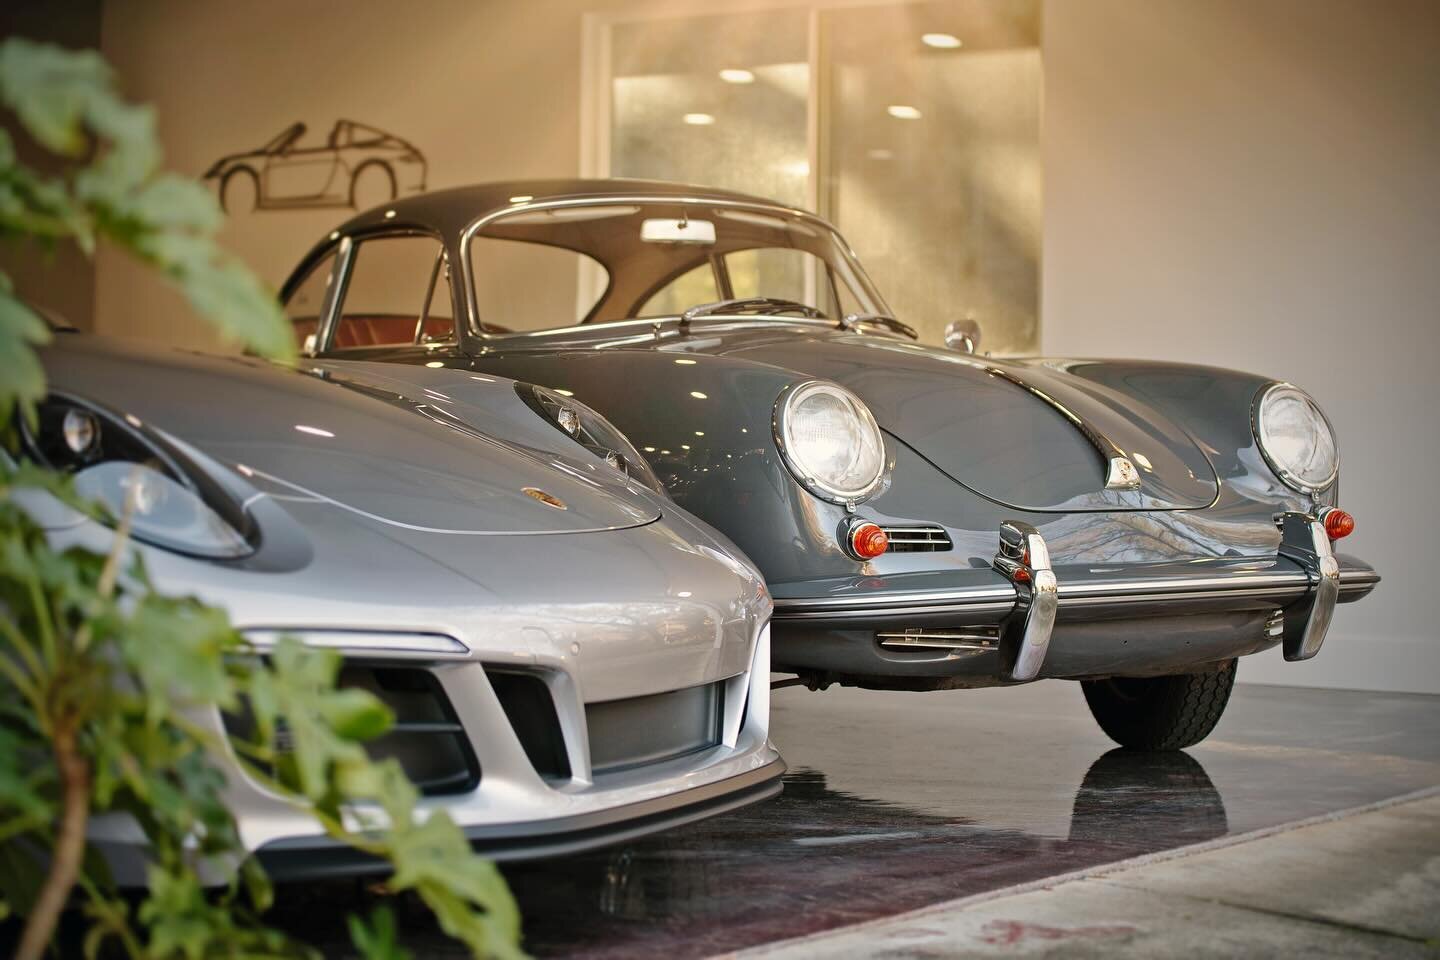 This 1963 Porsche S is still with the same family. The owner&rsquo;s father bought it in Germany during the war and had it shipped back to America. Such a cool piece of history and a beautiful family heirloom. 
.
#porsche #porsche911 #911 #targa #gts